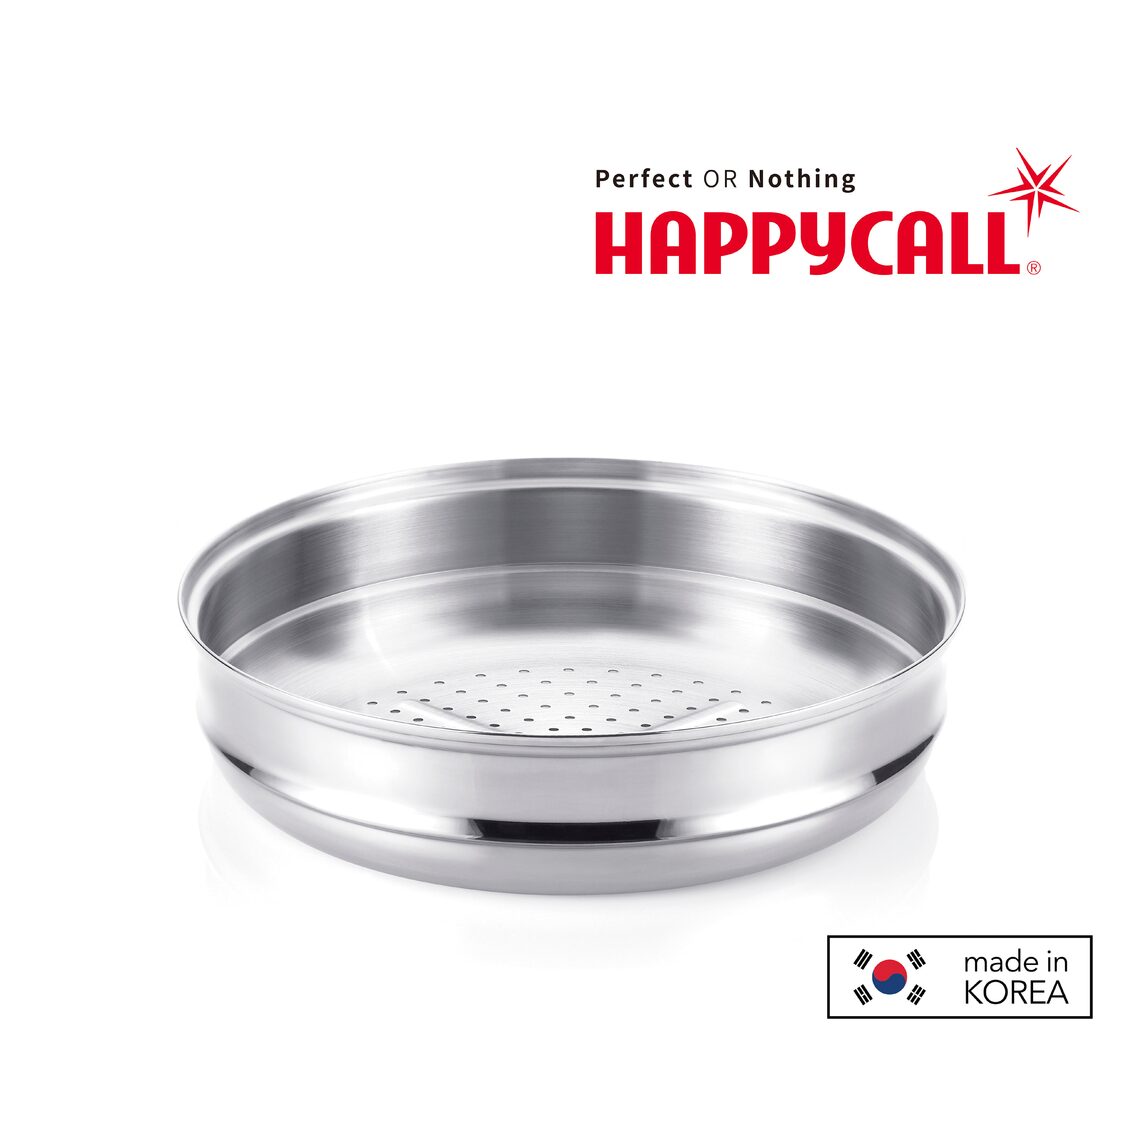 Happycall 32cm Stainless Steel Steamer 3800-1005